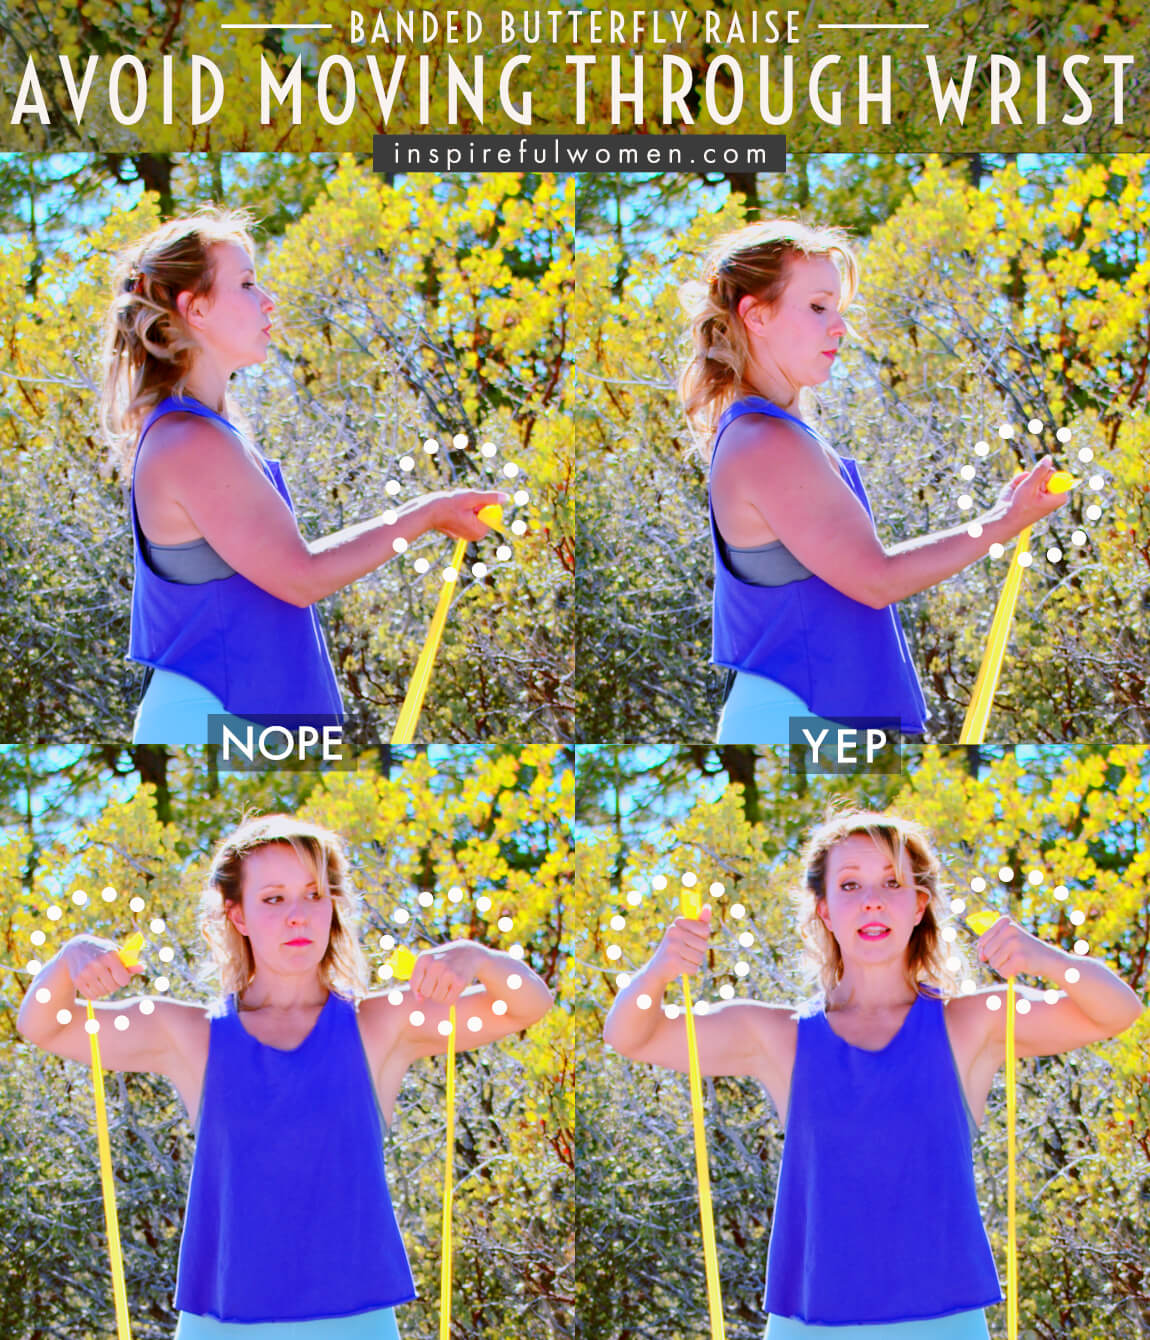 avoid-moving-through-wrist-banded-butterfly-raises-shoulder-exercise-proper-form